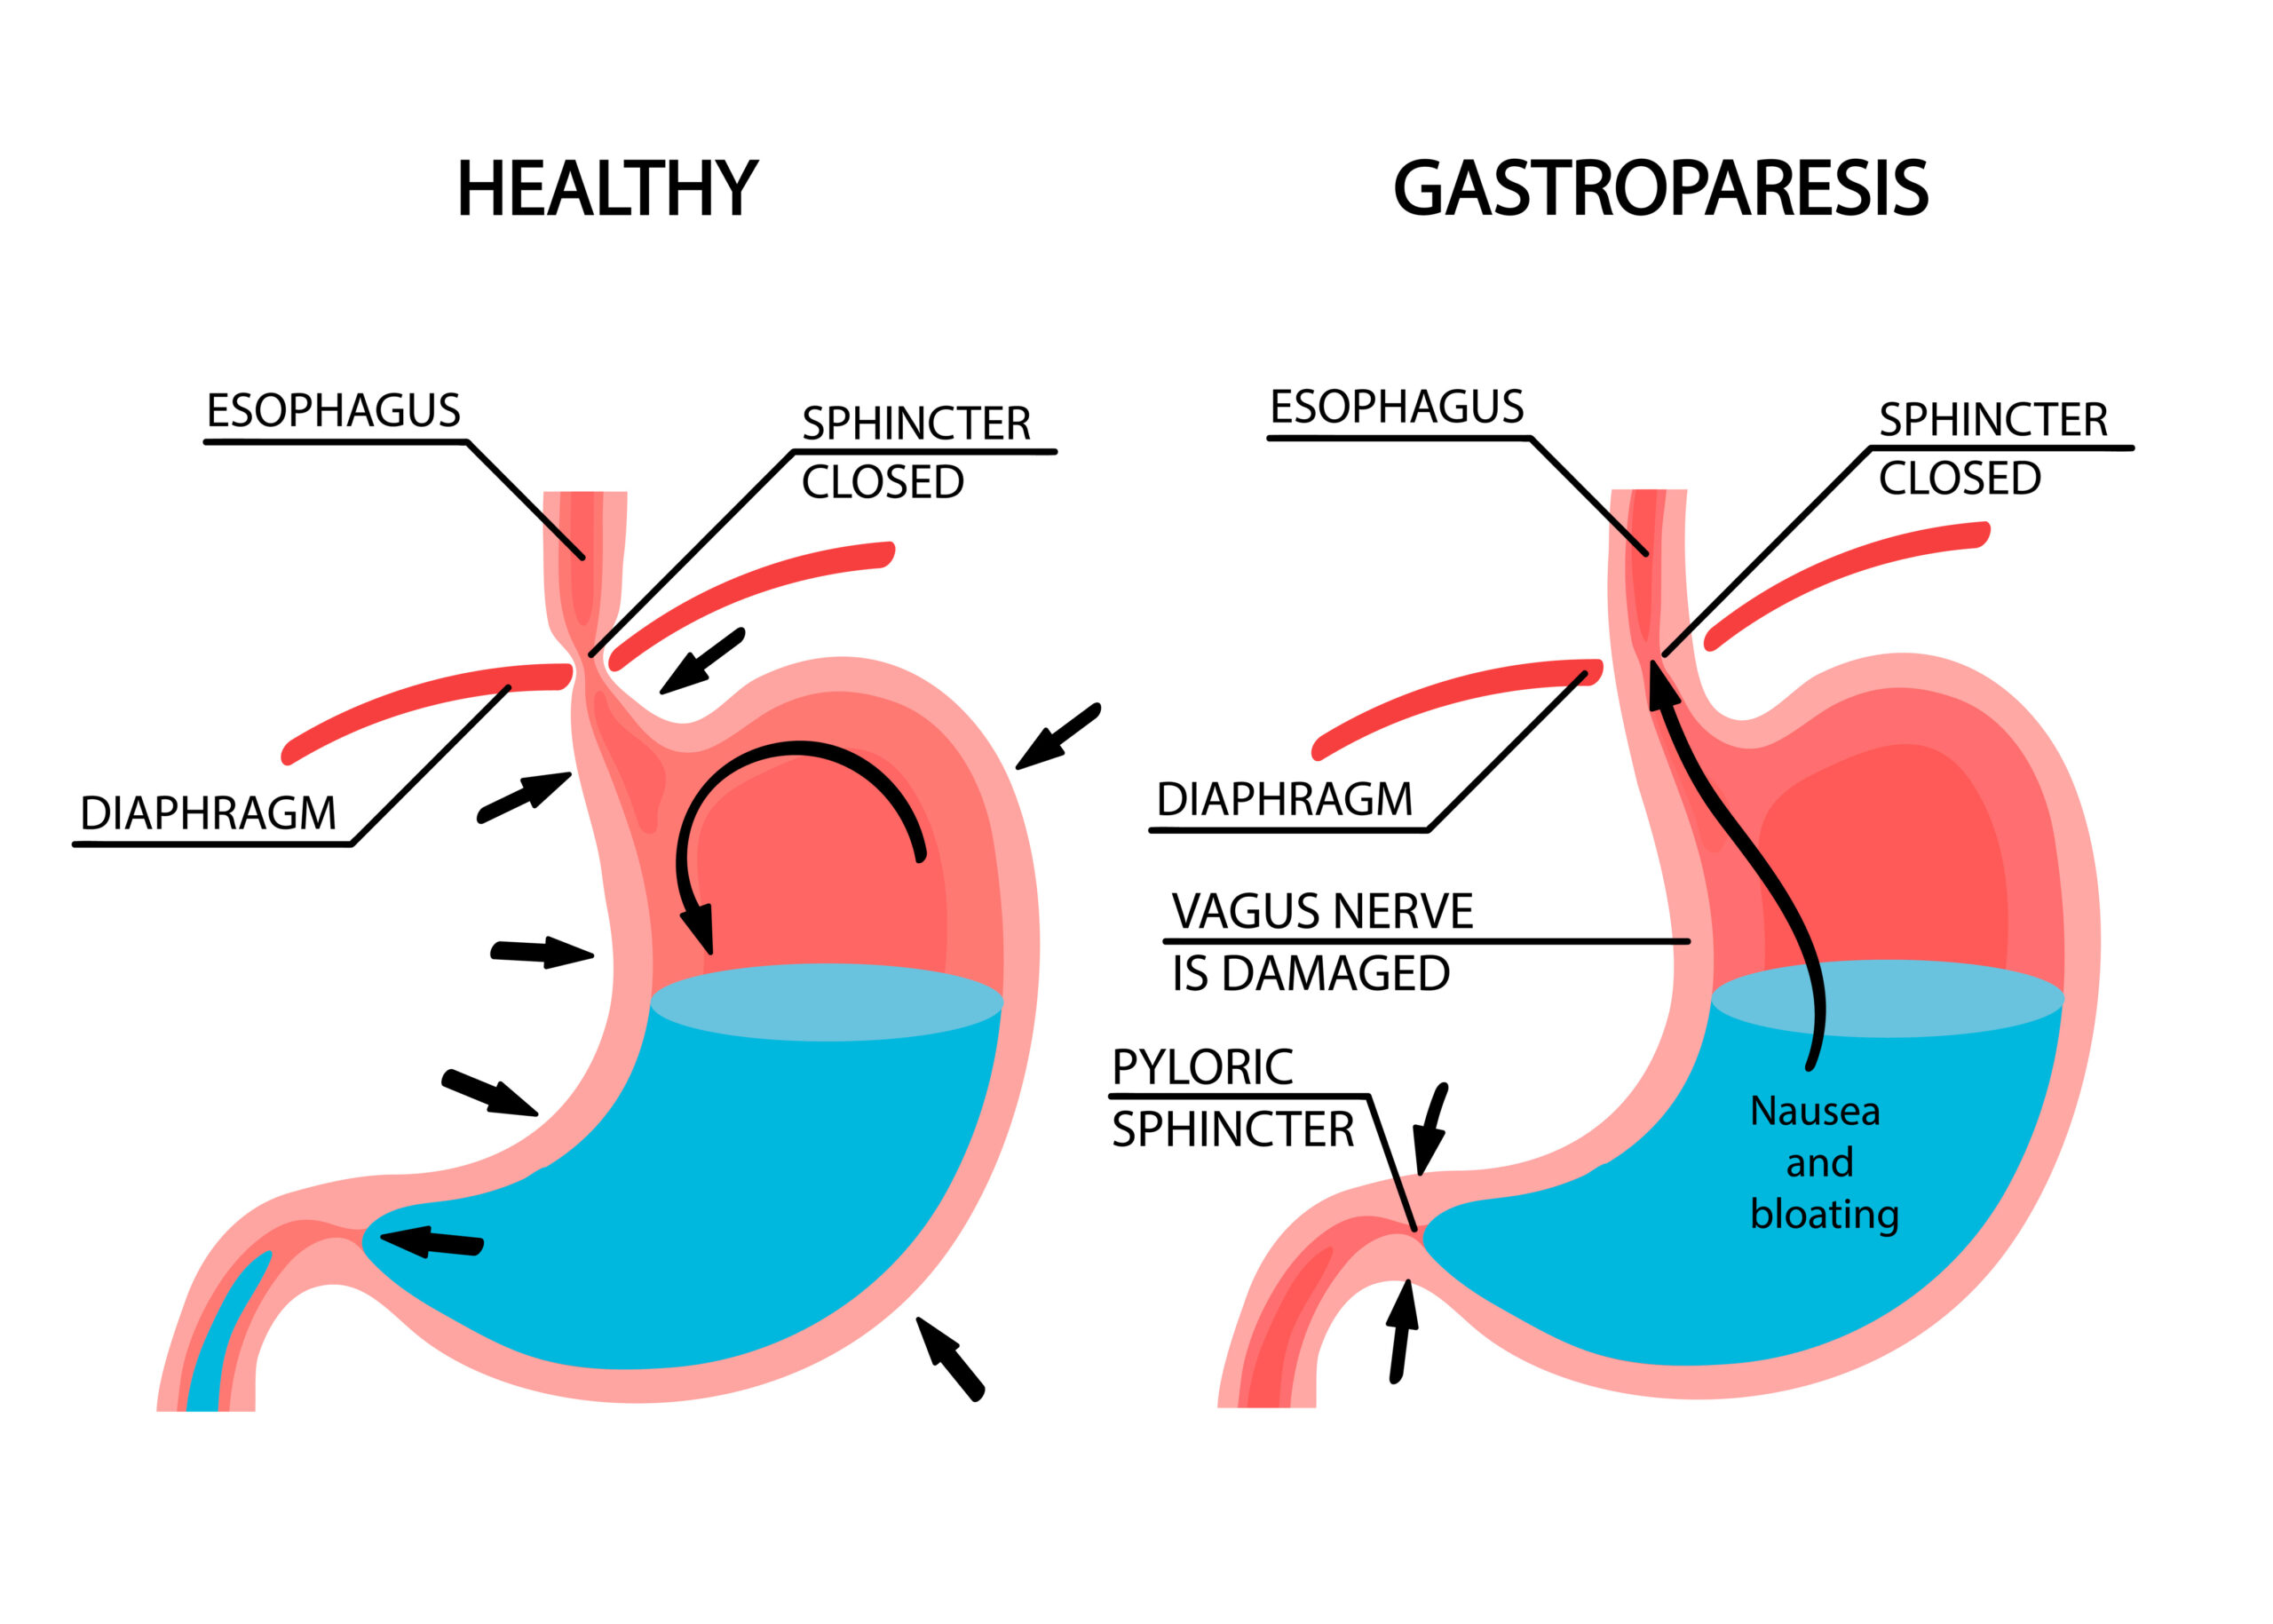 gastroparesis and GLP 1-RA drugs like Ozempic Wegovy and Rybelsus